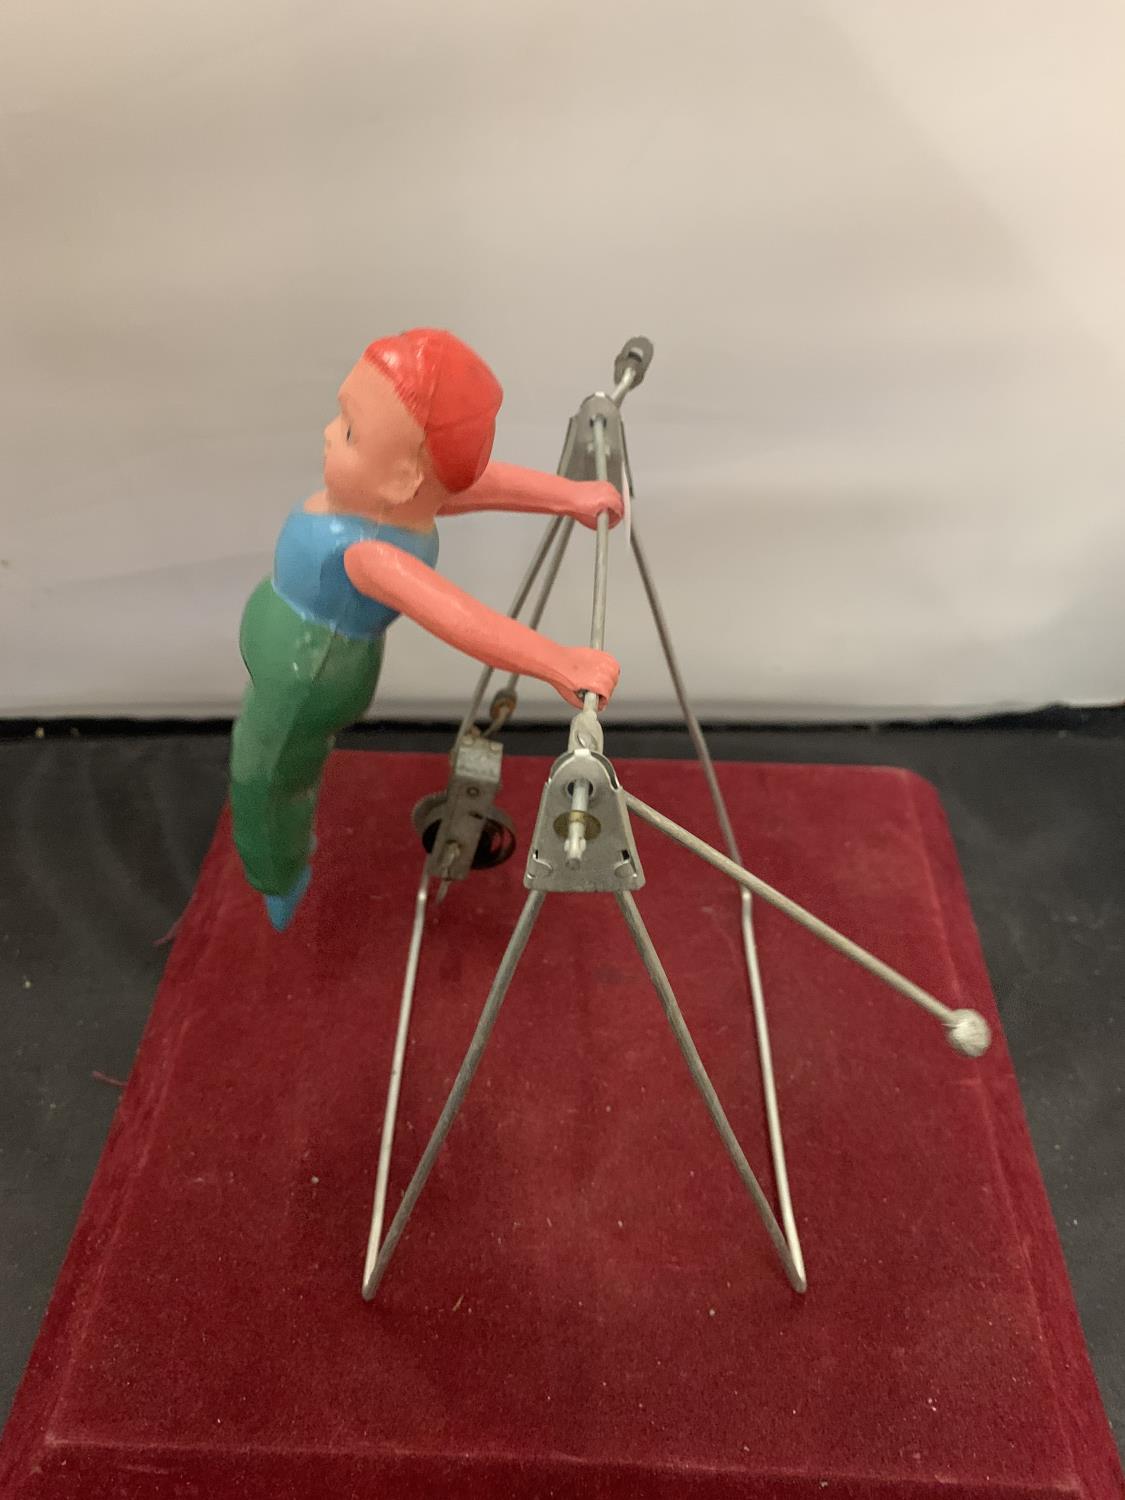 A 1950s GYRATING TOY IN THE FORM OF A GYMNAST - Image 2 of 3